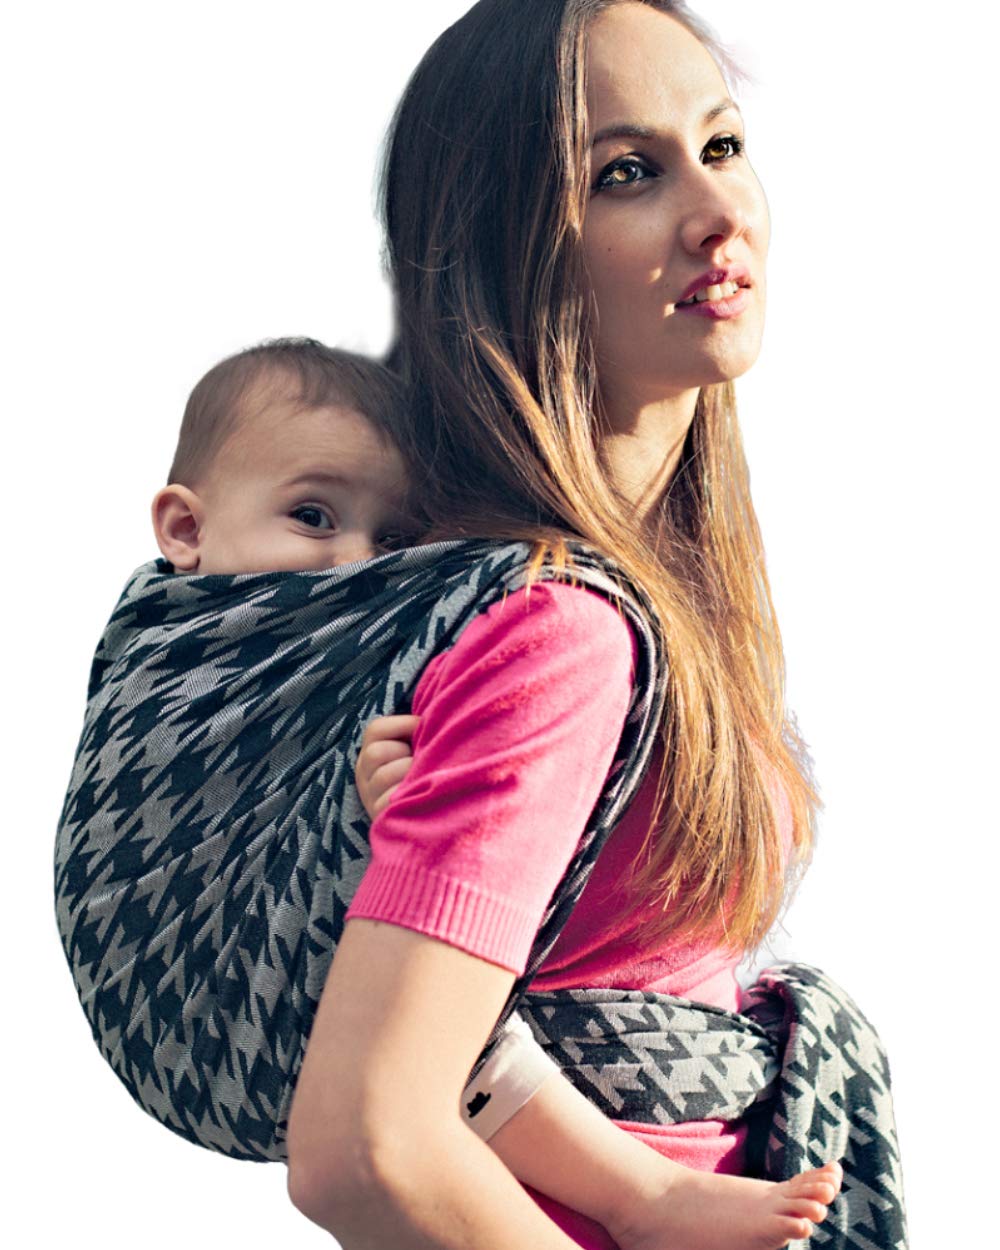 Didymos TTR 564 Sling Baby Repair Kit, Model Houndstooth Charcoal Grey, Size 8, BLACK/WHITE